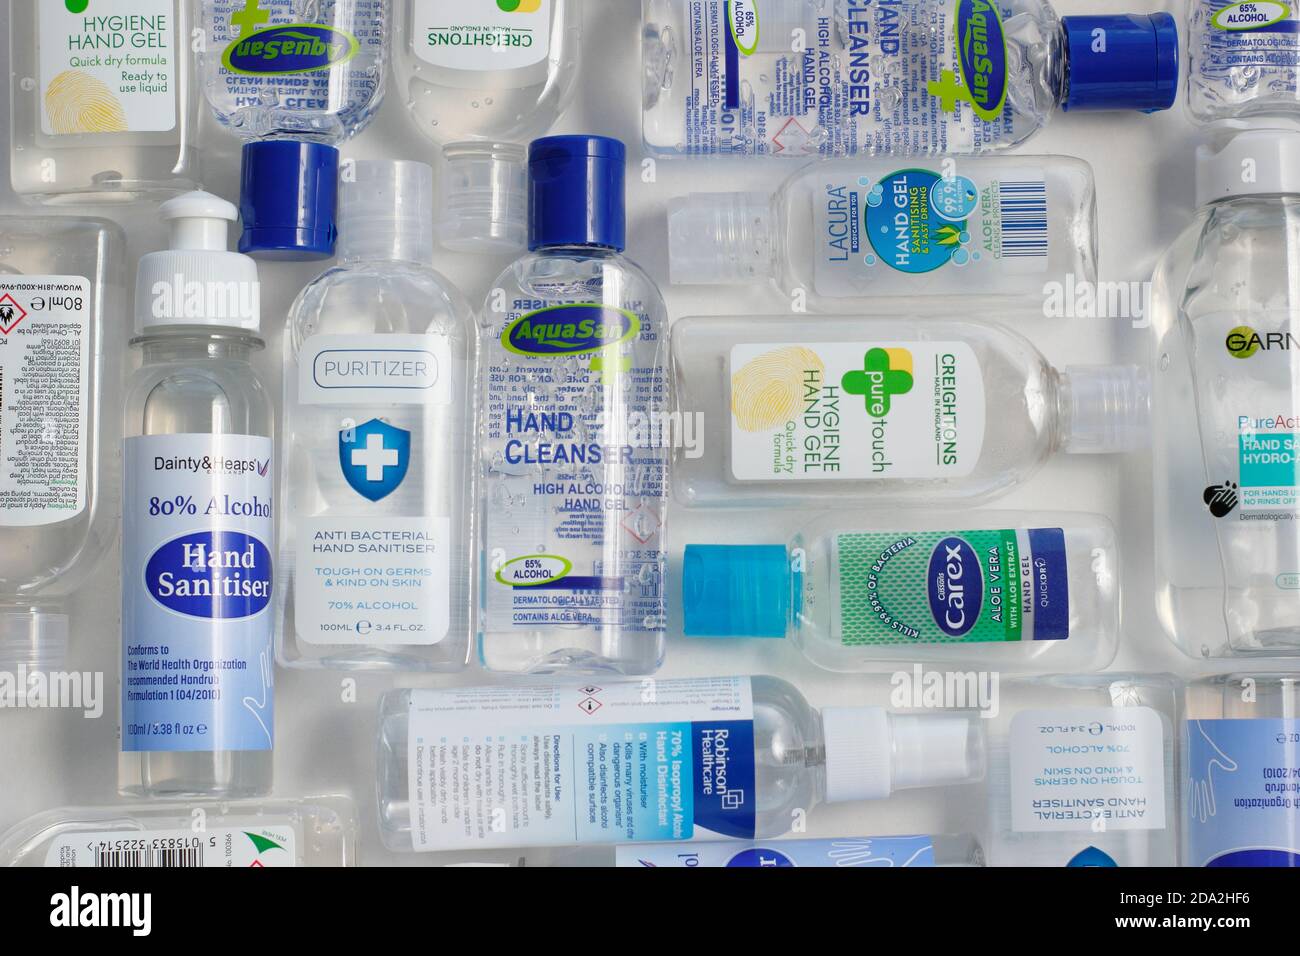 Hand sanitizer. Selection of plastic bottles containing hand sanitiser with varying alcohol content. UK Stock Photo